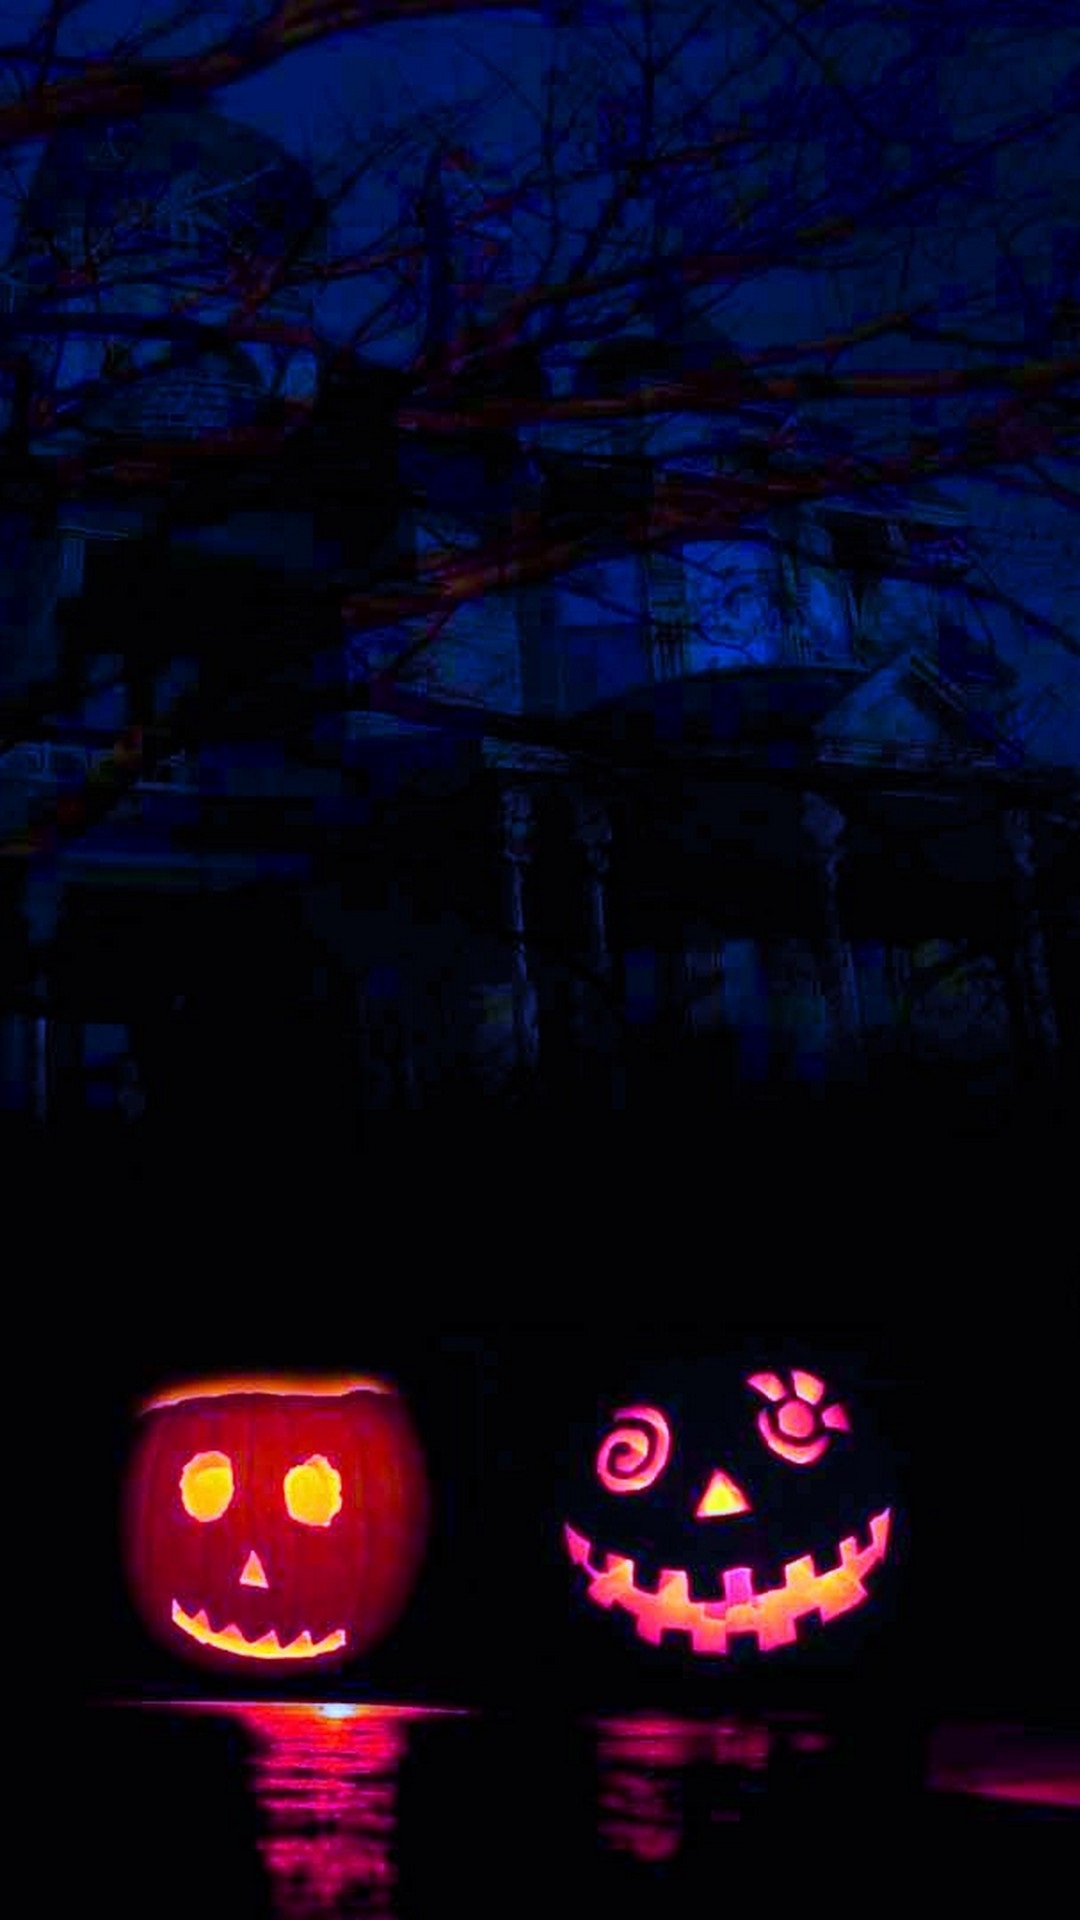 Halloween Aesthetic iPhone Wallpaper with high-resolution 1080x1920 pixel. You can use this wallpaper for your iPhone 5, 6, 7, 8, X, XS, XR backgrounds, Mobile Screensaver, or iPad Lock Screen